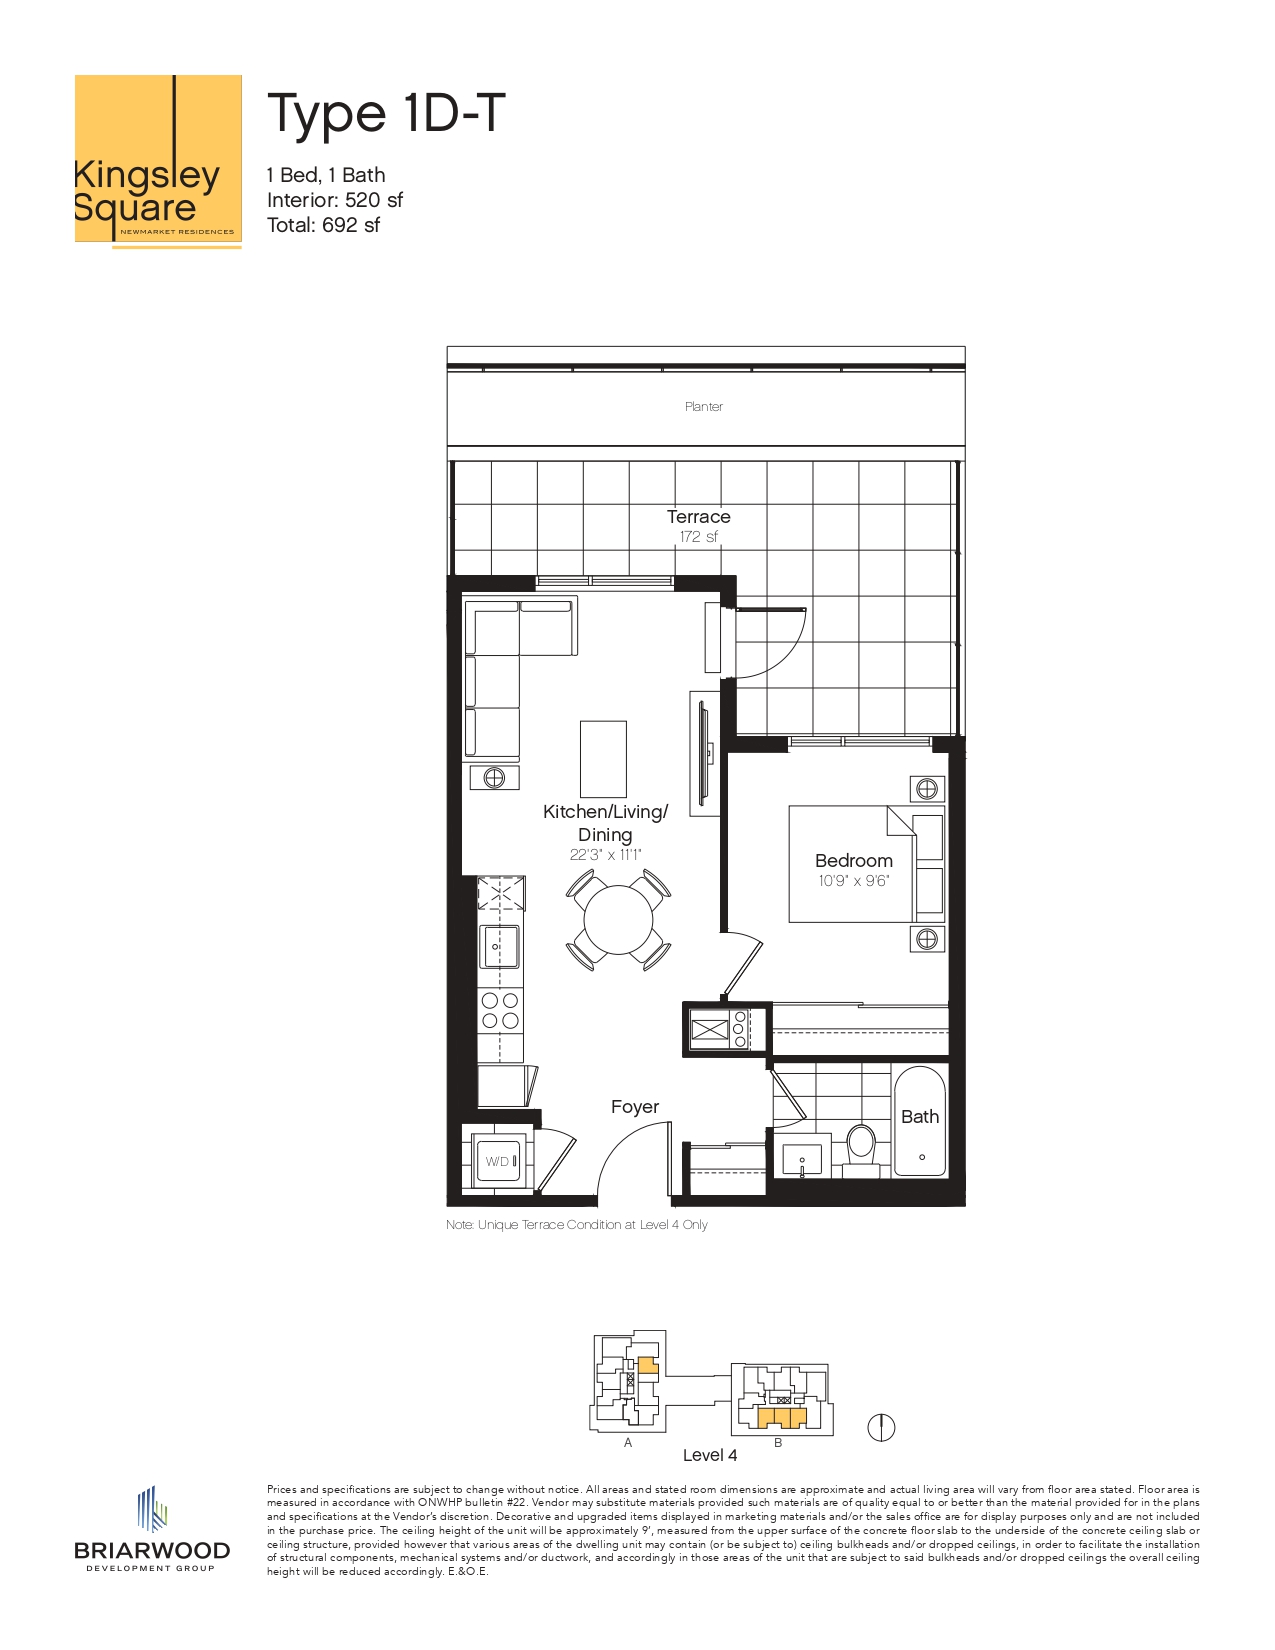  1D-T  Floor Plan of Kingsley Square Condos with undefined beds